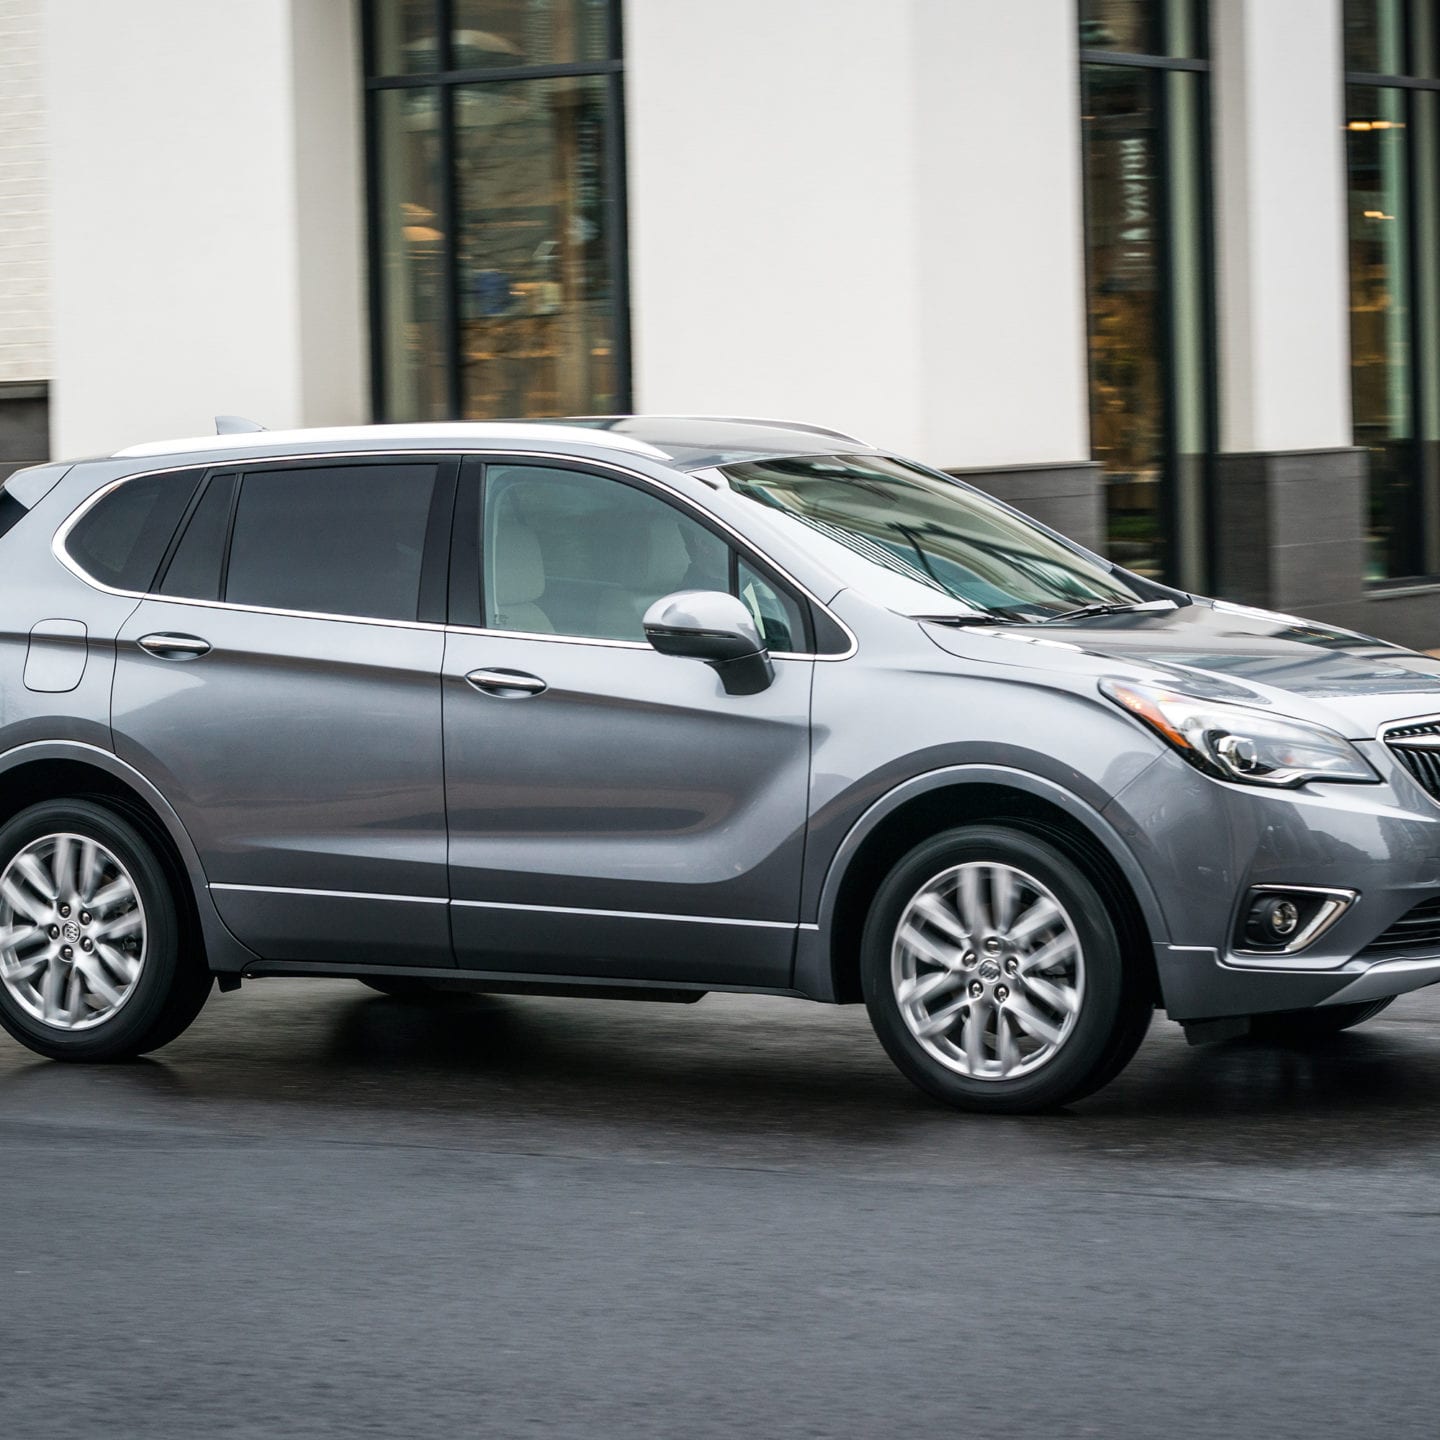 2019 Buick Envision interior review